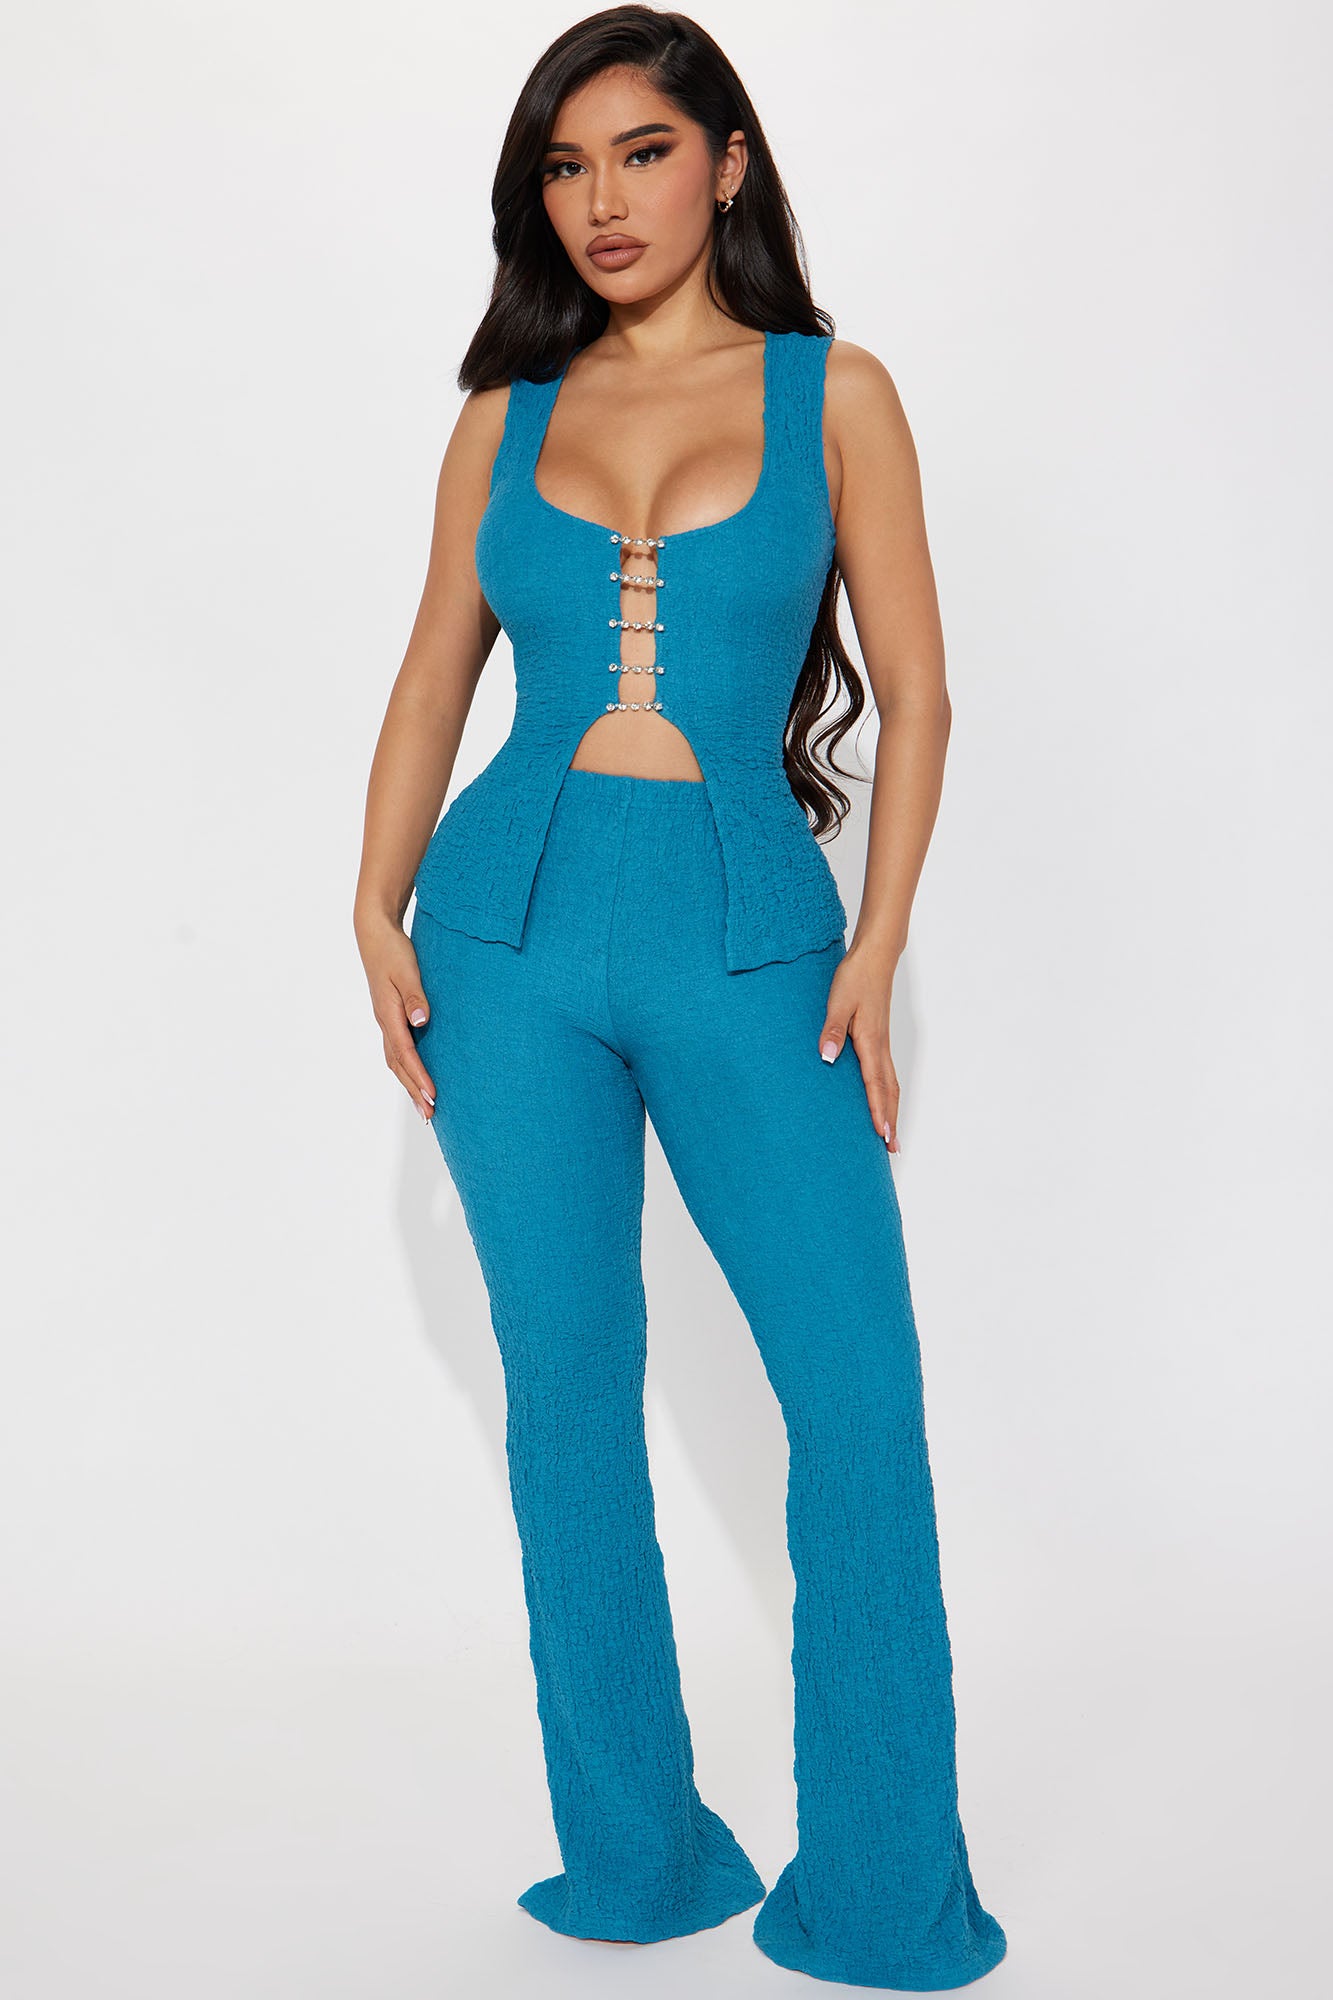 All Chained Up Textured Pant Set - Teal